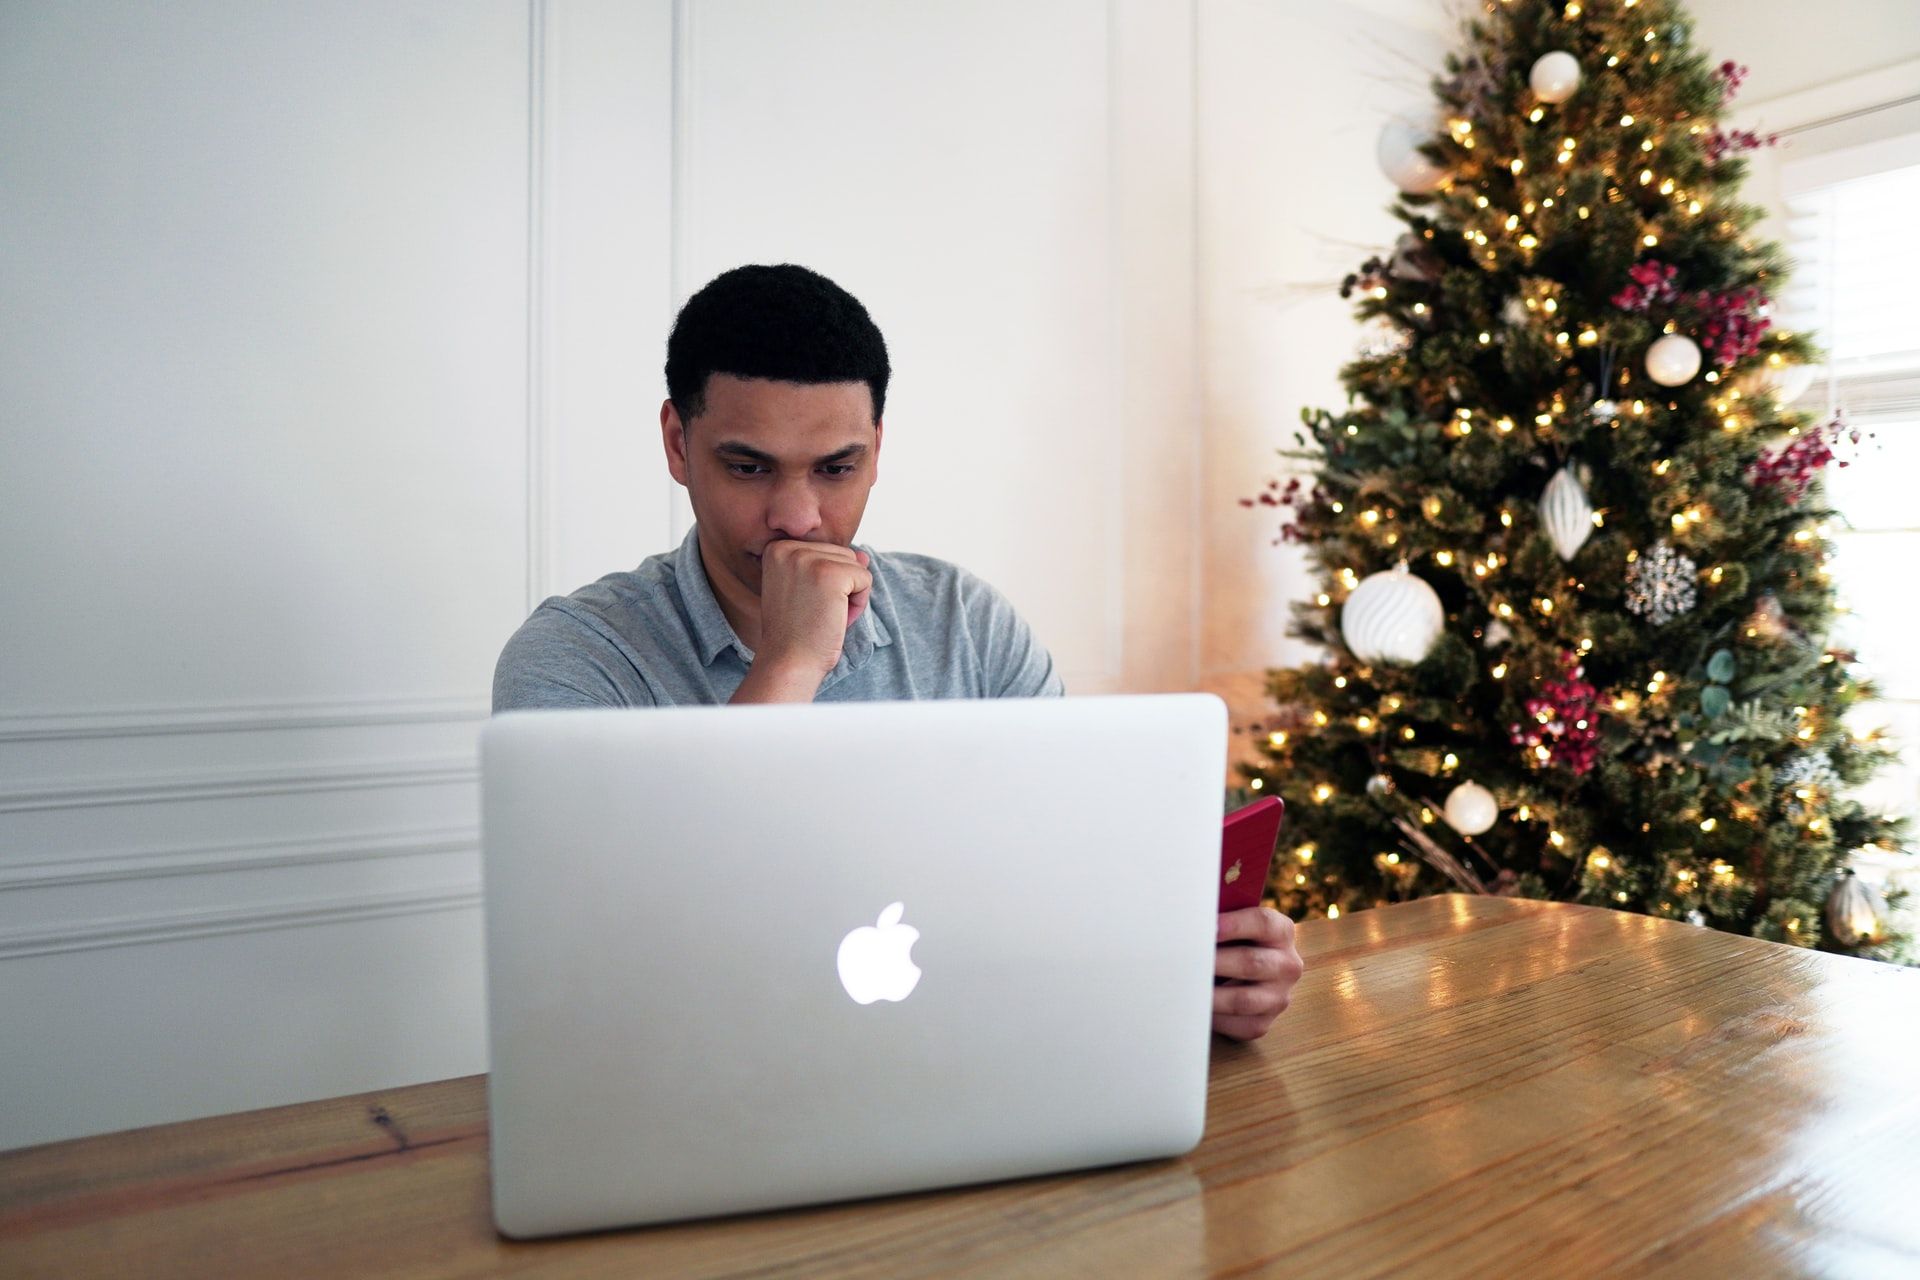 5 Christmas marketing campaigns you should avoid